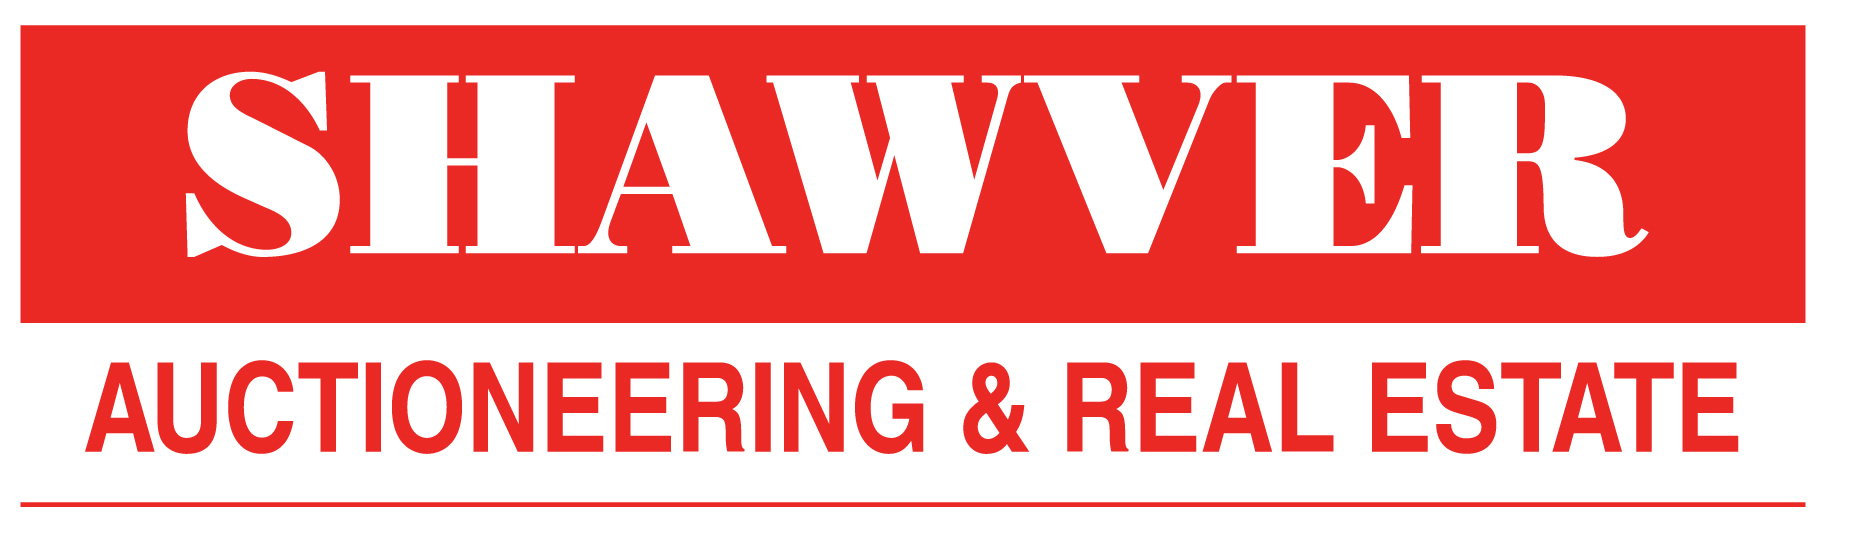 Shawver Auctioneering and Real Estate